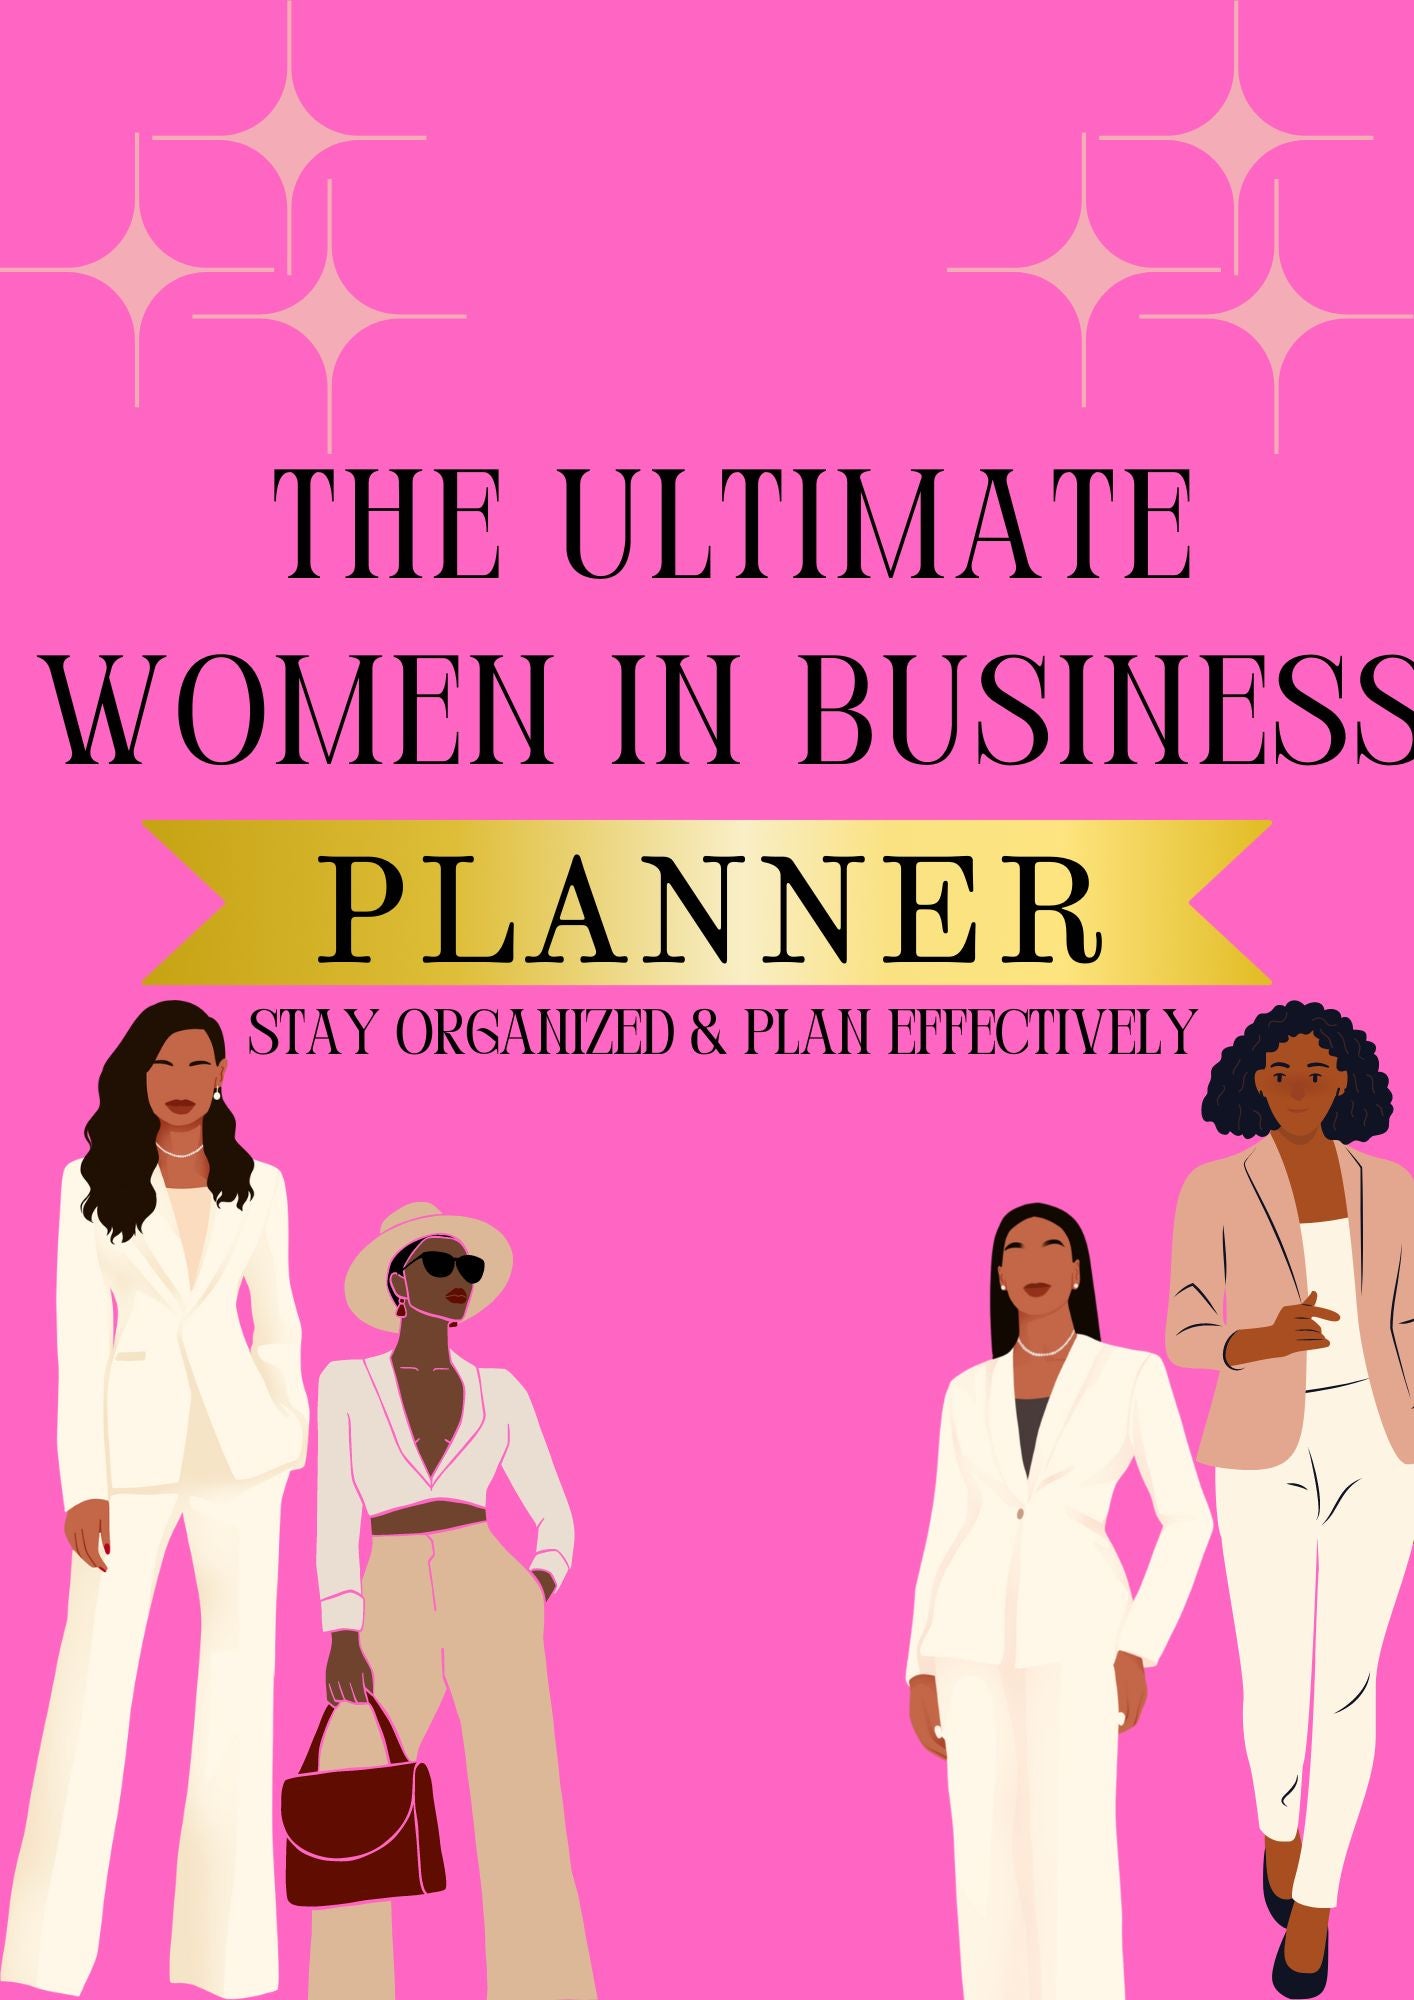 GBU-The Ultimate Women In Business Planner template (RESELL RIGHTS)